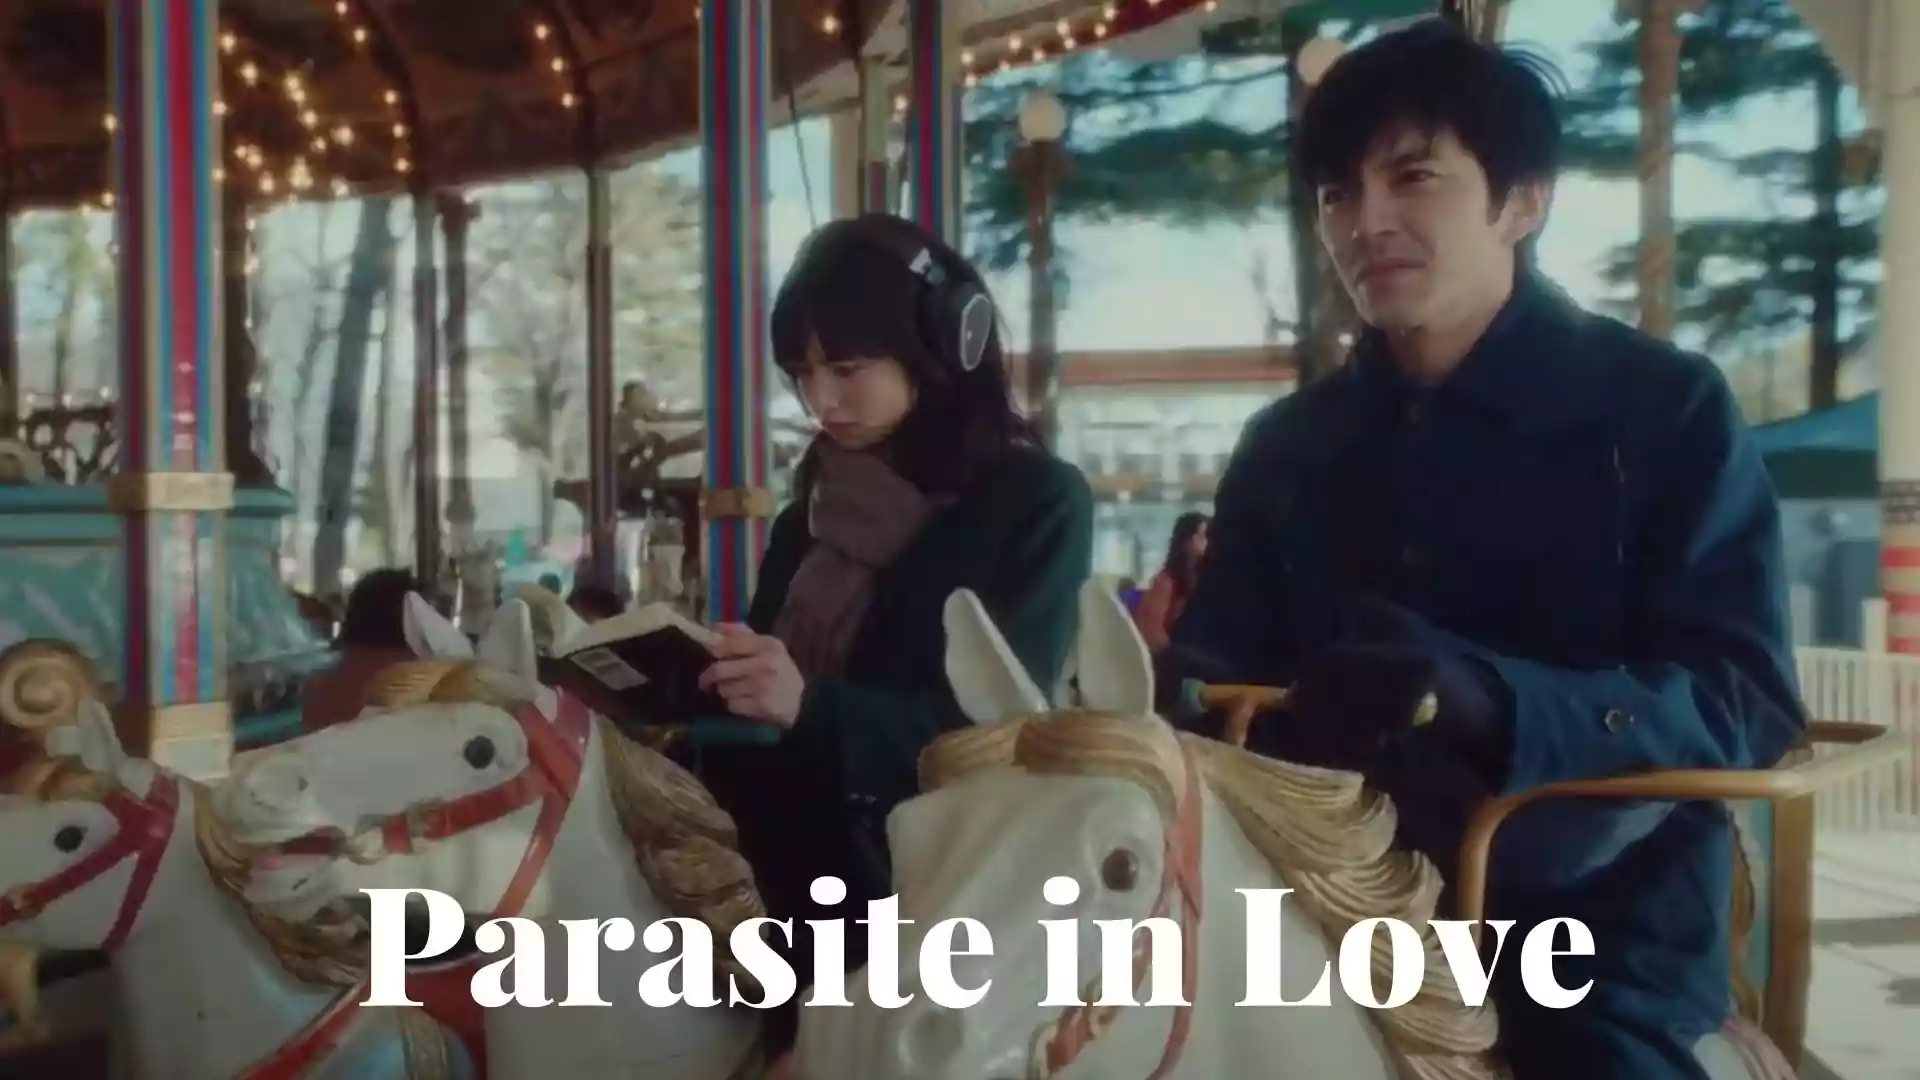 Parasite in Love Parents guide and Age Rating